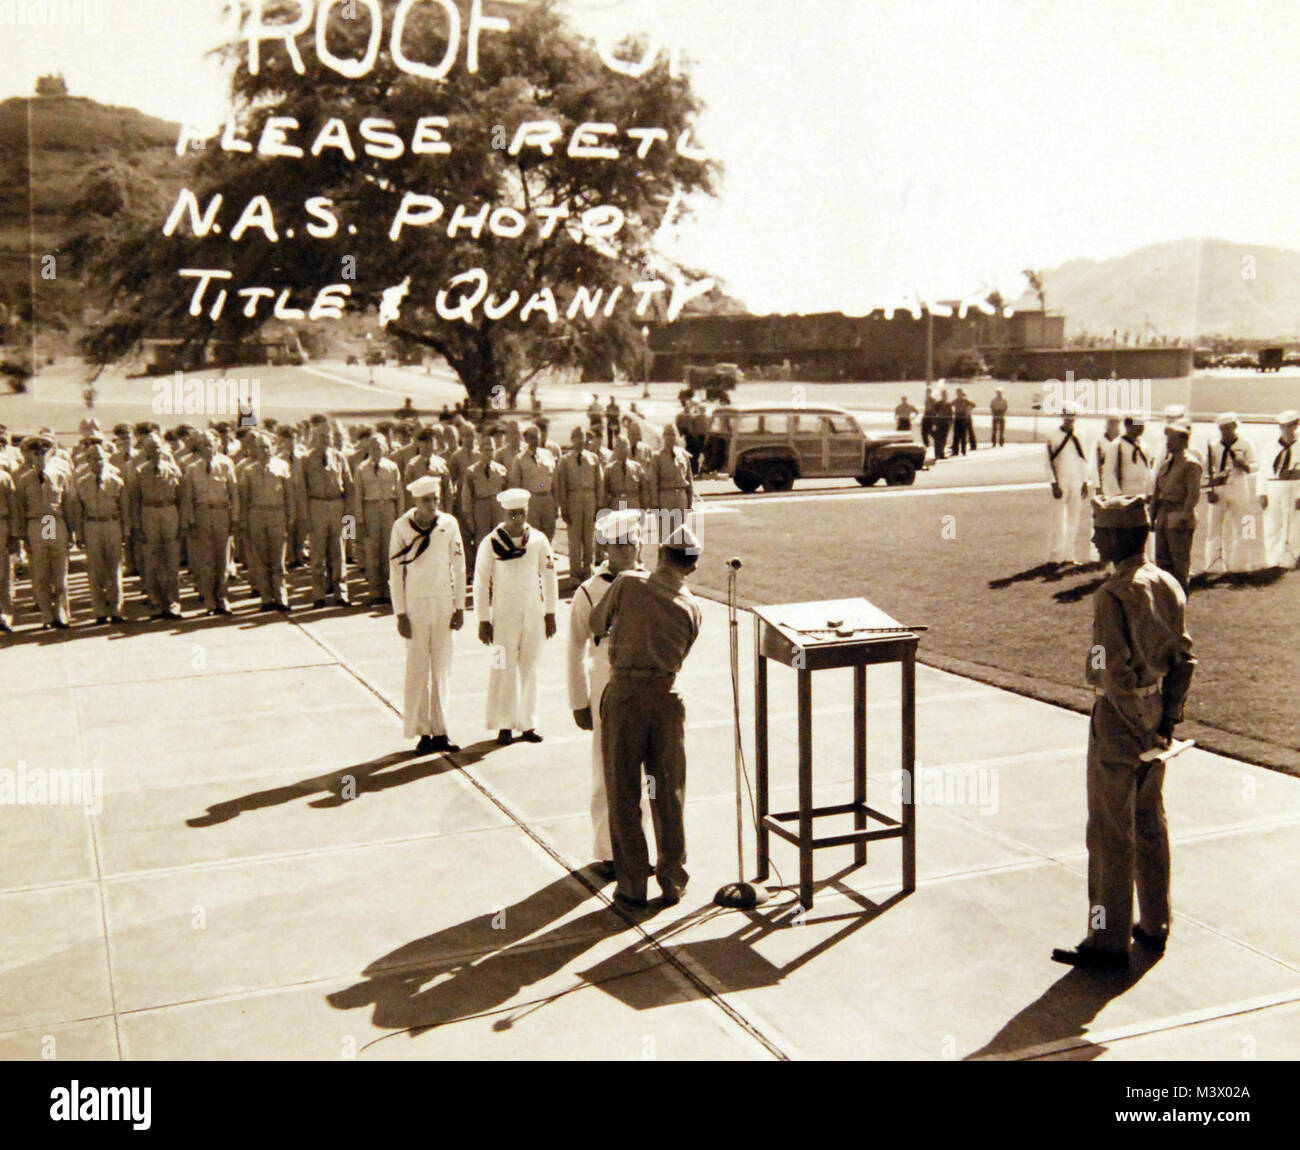 80-G-419189:  Pearl Harbor, Territory of Hawaii, May 1943.  Captain Wallace M. Dillon presents Purple Heart at Naval Air Station, Kaneohe Bay.  Shown:   S1 Fred William Jordan receives award.  Also awarded during ceremony were PRTR3 Leroy G. Maltby and AM2 Wayne Alford Johnson.  Men were wounded during the Japanese raid on December 7, 1941.  Official U.S. Navy Photograph, now in the collections of the National Archives.  (2018/01/24). 80-G-419189 38979975545 o Stock Photo